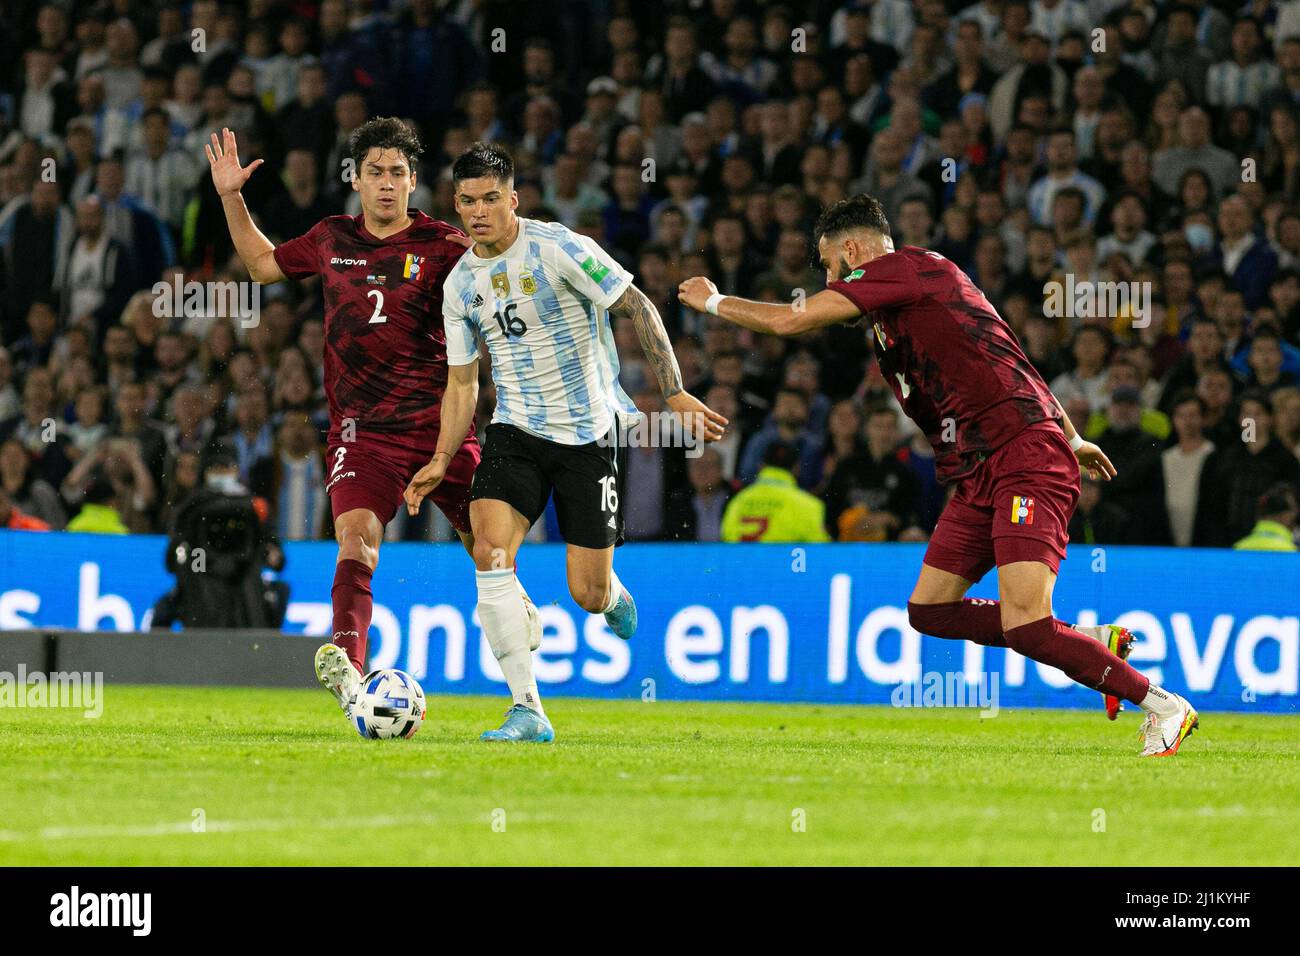 BUENOS AIRES, ARGENTINA - MARCH 25: Joaquin Correa of Argentina fights for the ball with Nahuel Ferraresi of Venezuela during the Fifa World Cup Qualifiers - Conmebol match between Argentina and Venezuela at La Bombonera Stadium on March 25, 2022 in Buenos Aires, Argentina. (Photo by Florencia Tan Jun/Pximages) Stock Photo